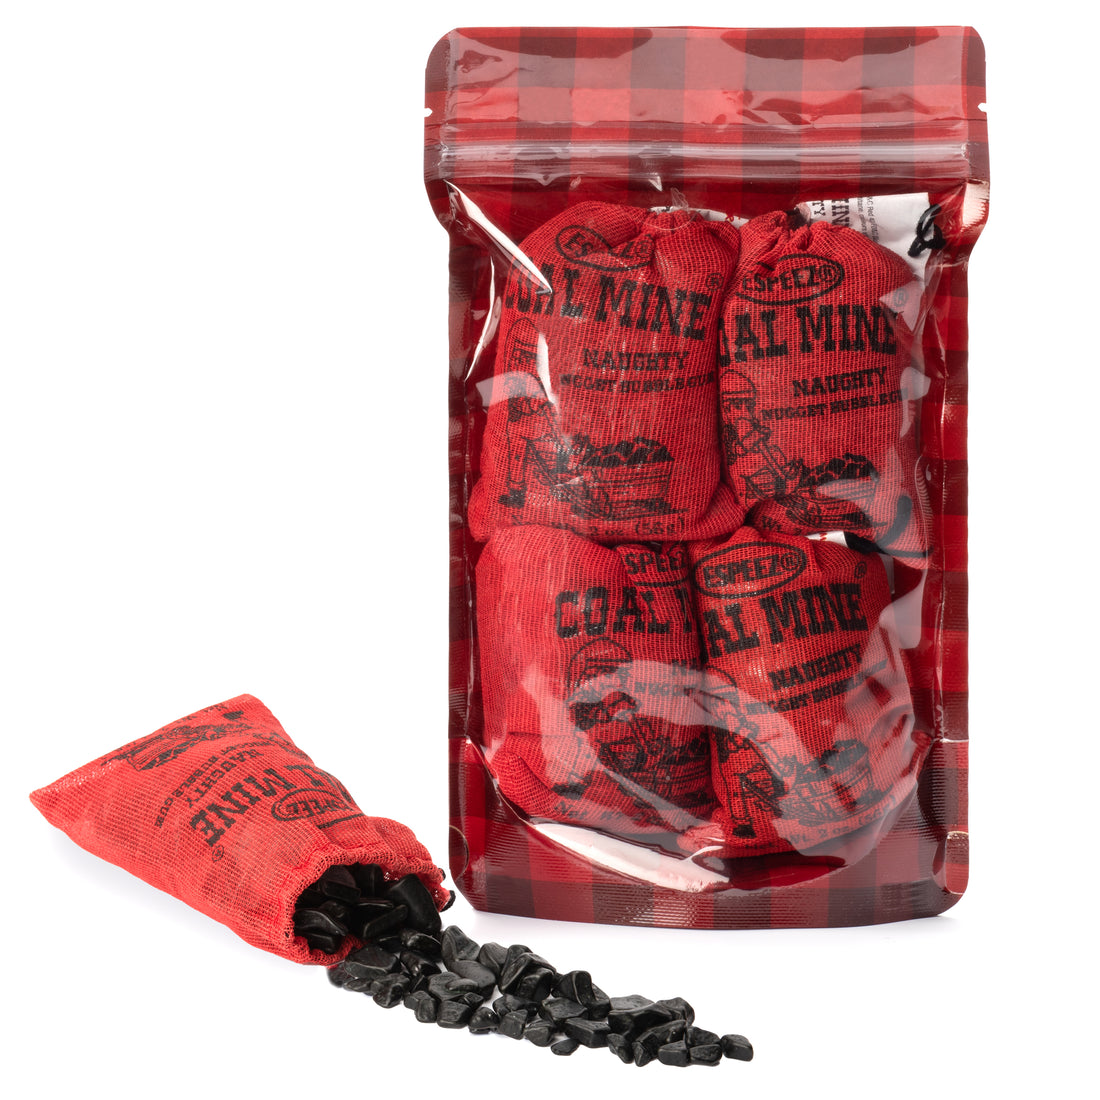 Coal Mine Gum in Packaging for 4 Pack